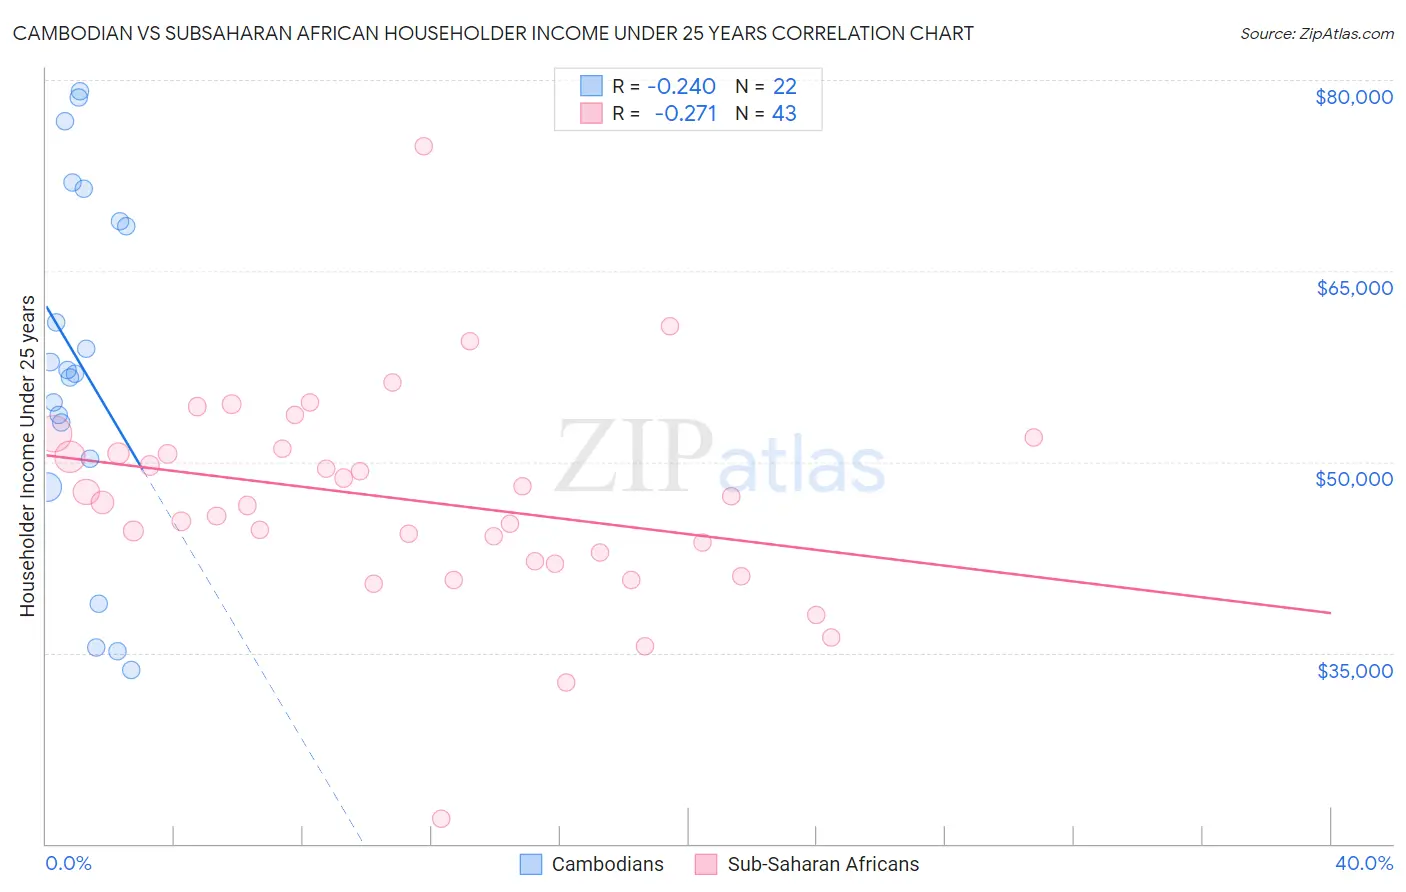 Cambodian vs Subsaharan African Householder Income Under 25 years